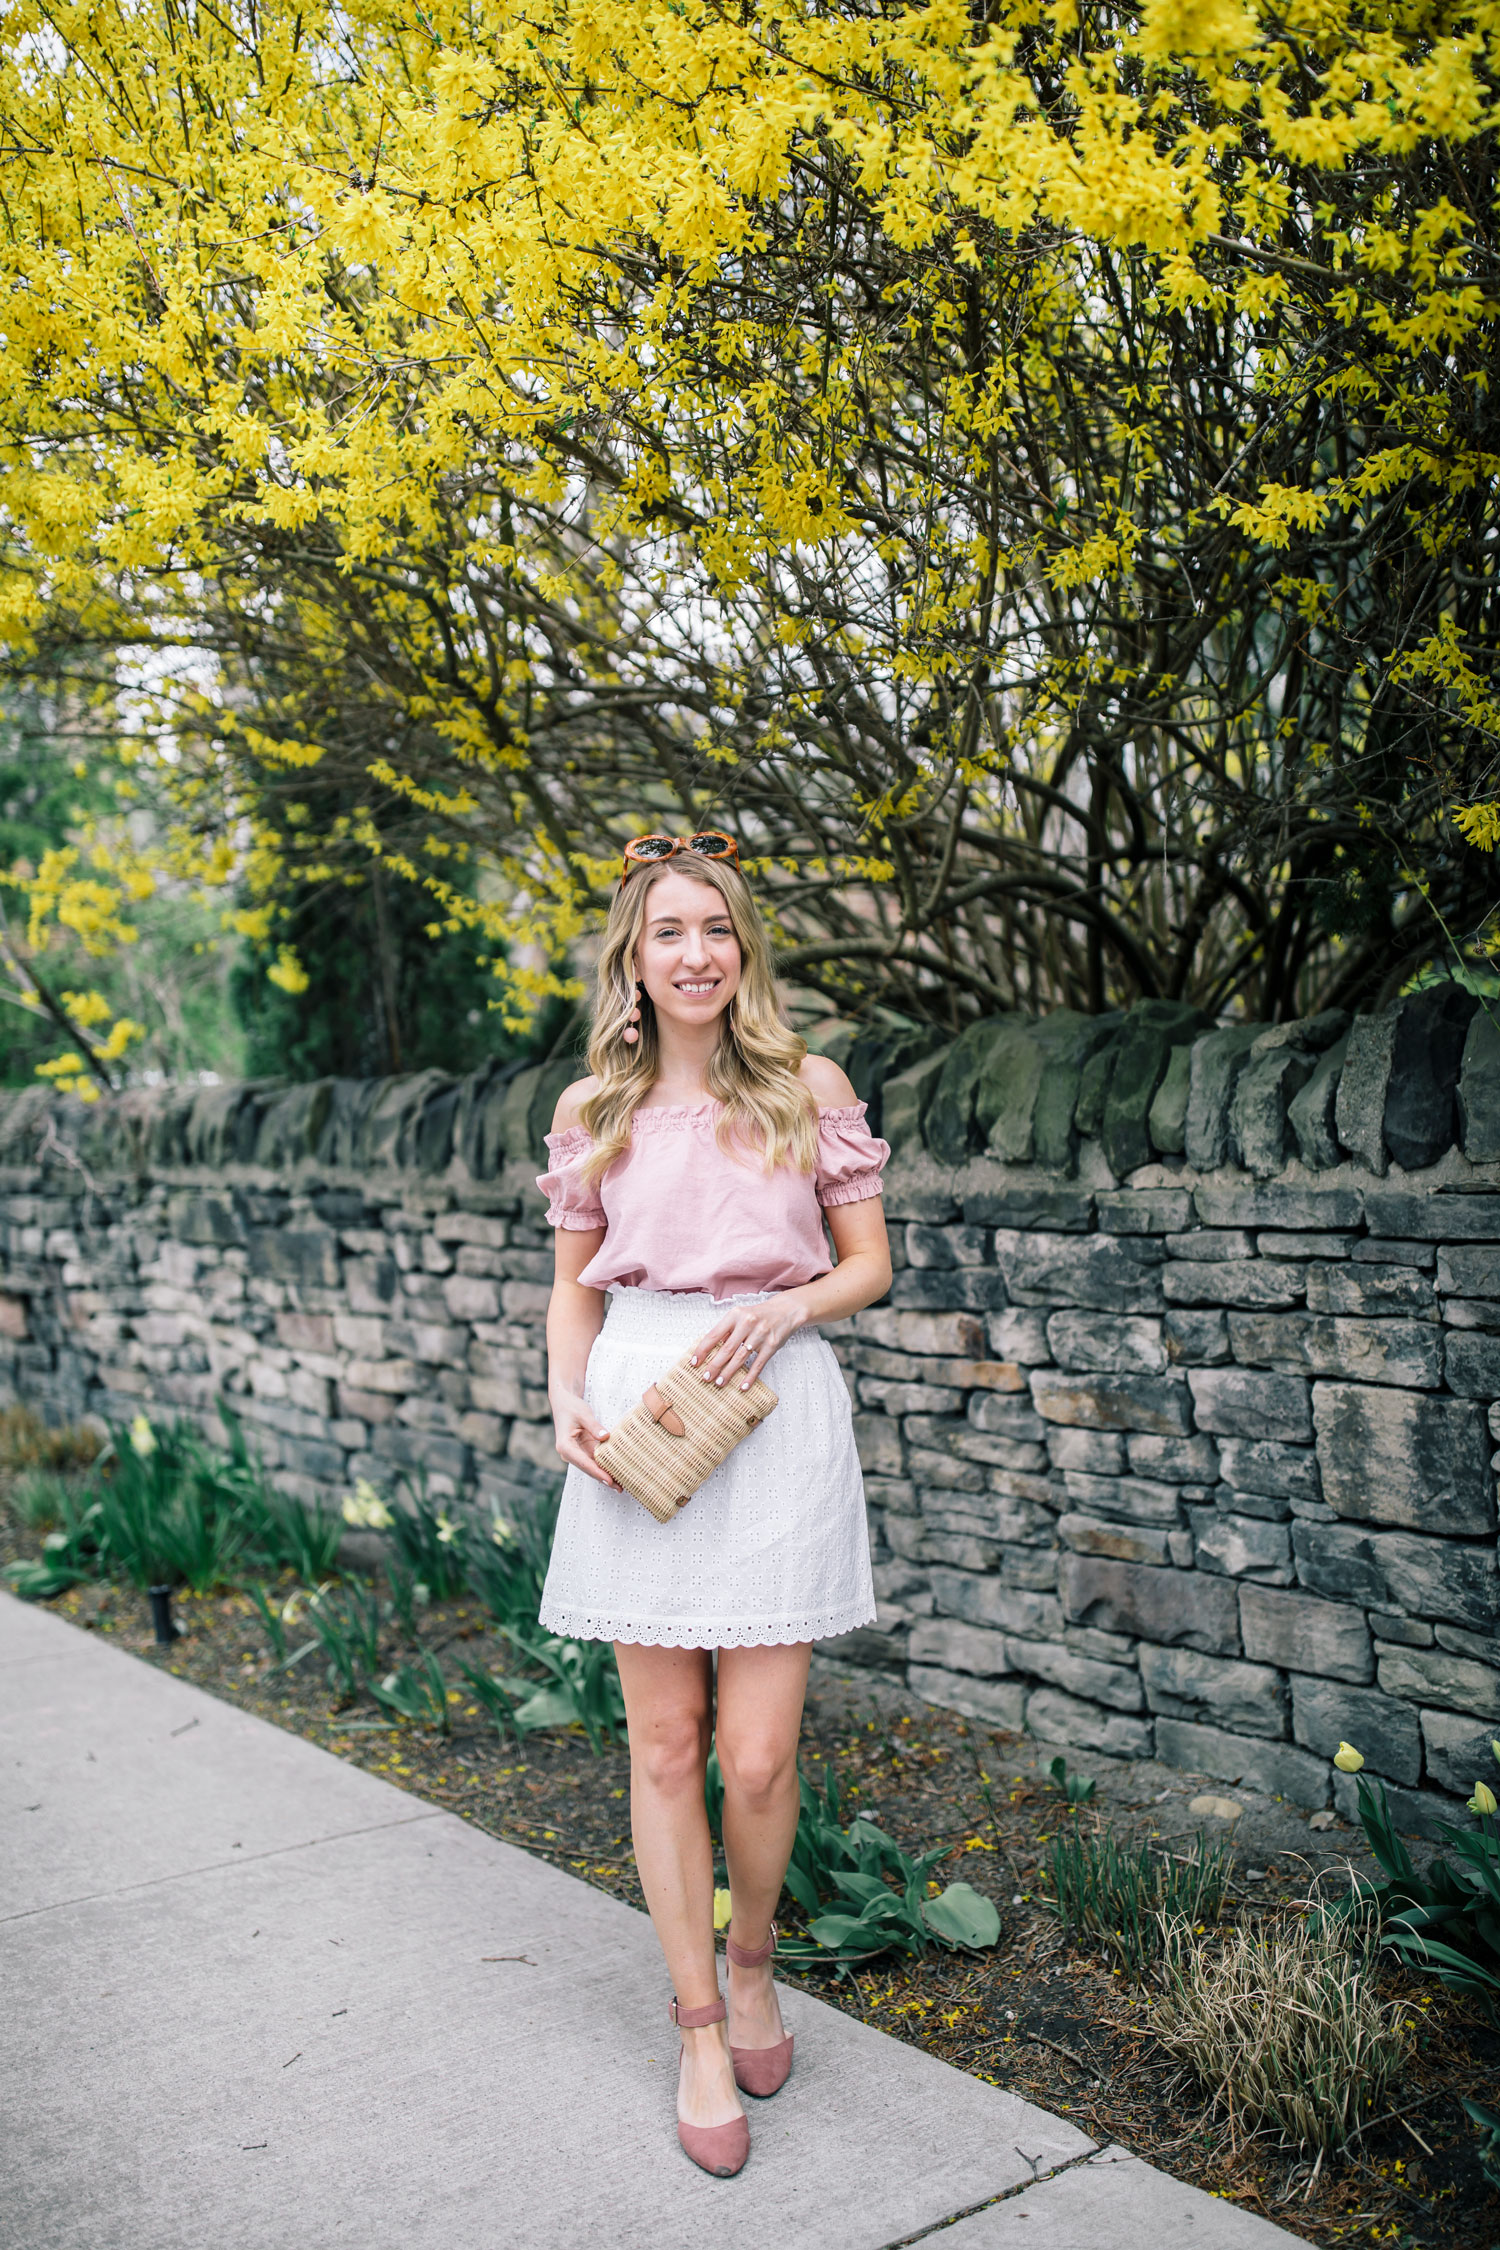 Linen & Eyelet Lace | The Blondielocks | Life + Style